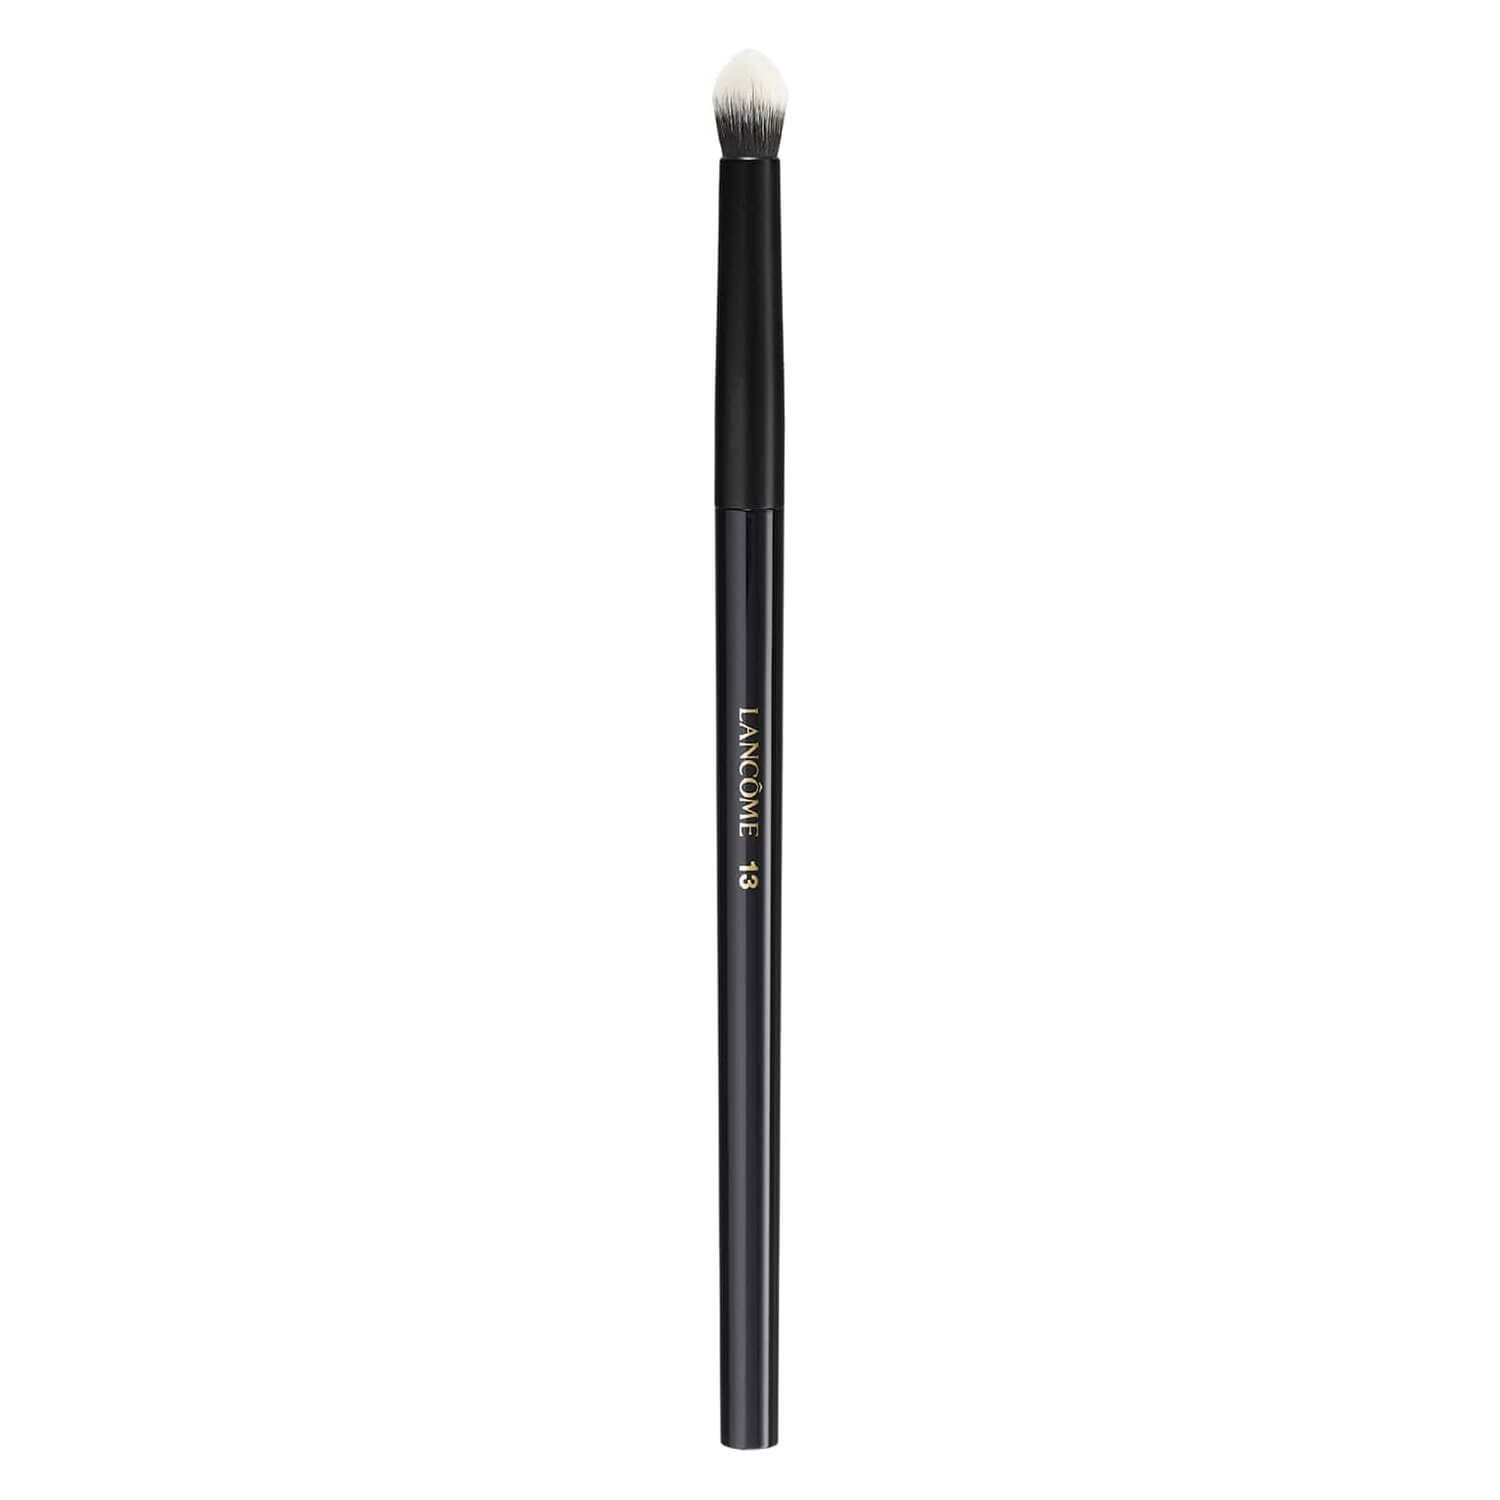 Product image from Lancôme Tools - Petit Crease Precision Eyeshadow Brush 13